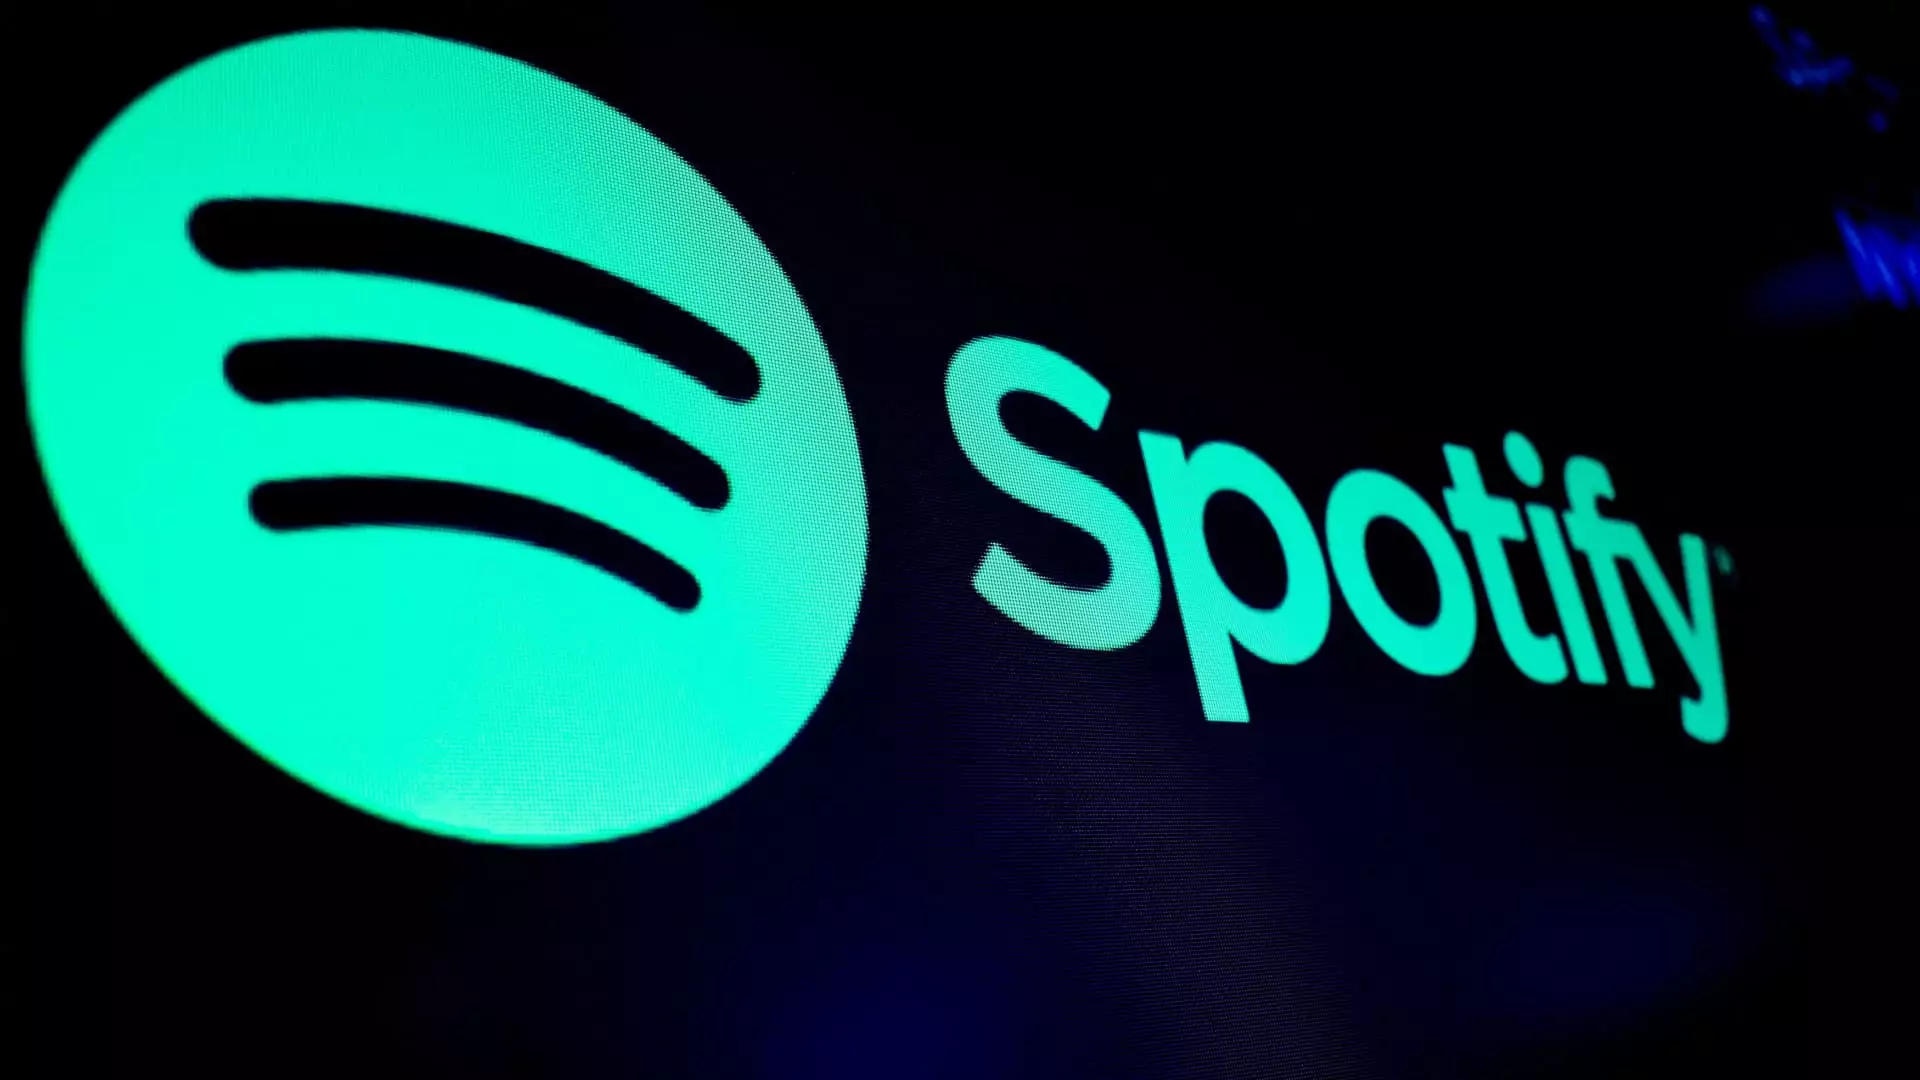 Spotify to Increase Prices for Premium Subscription Service, Shares Jump 6%